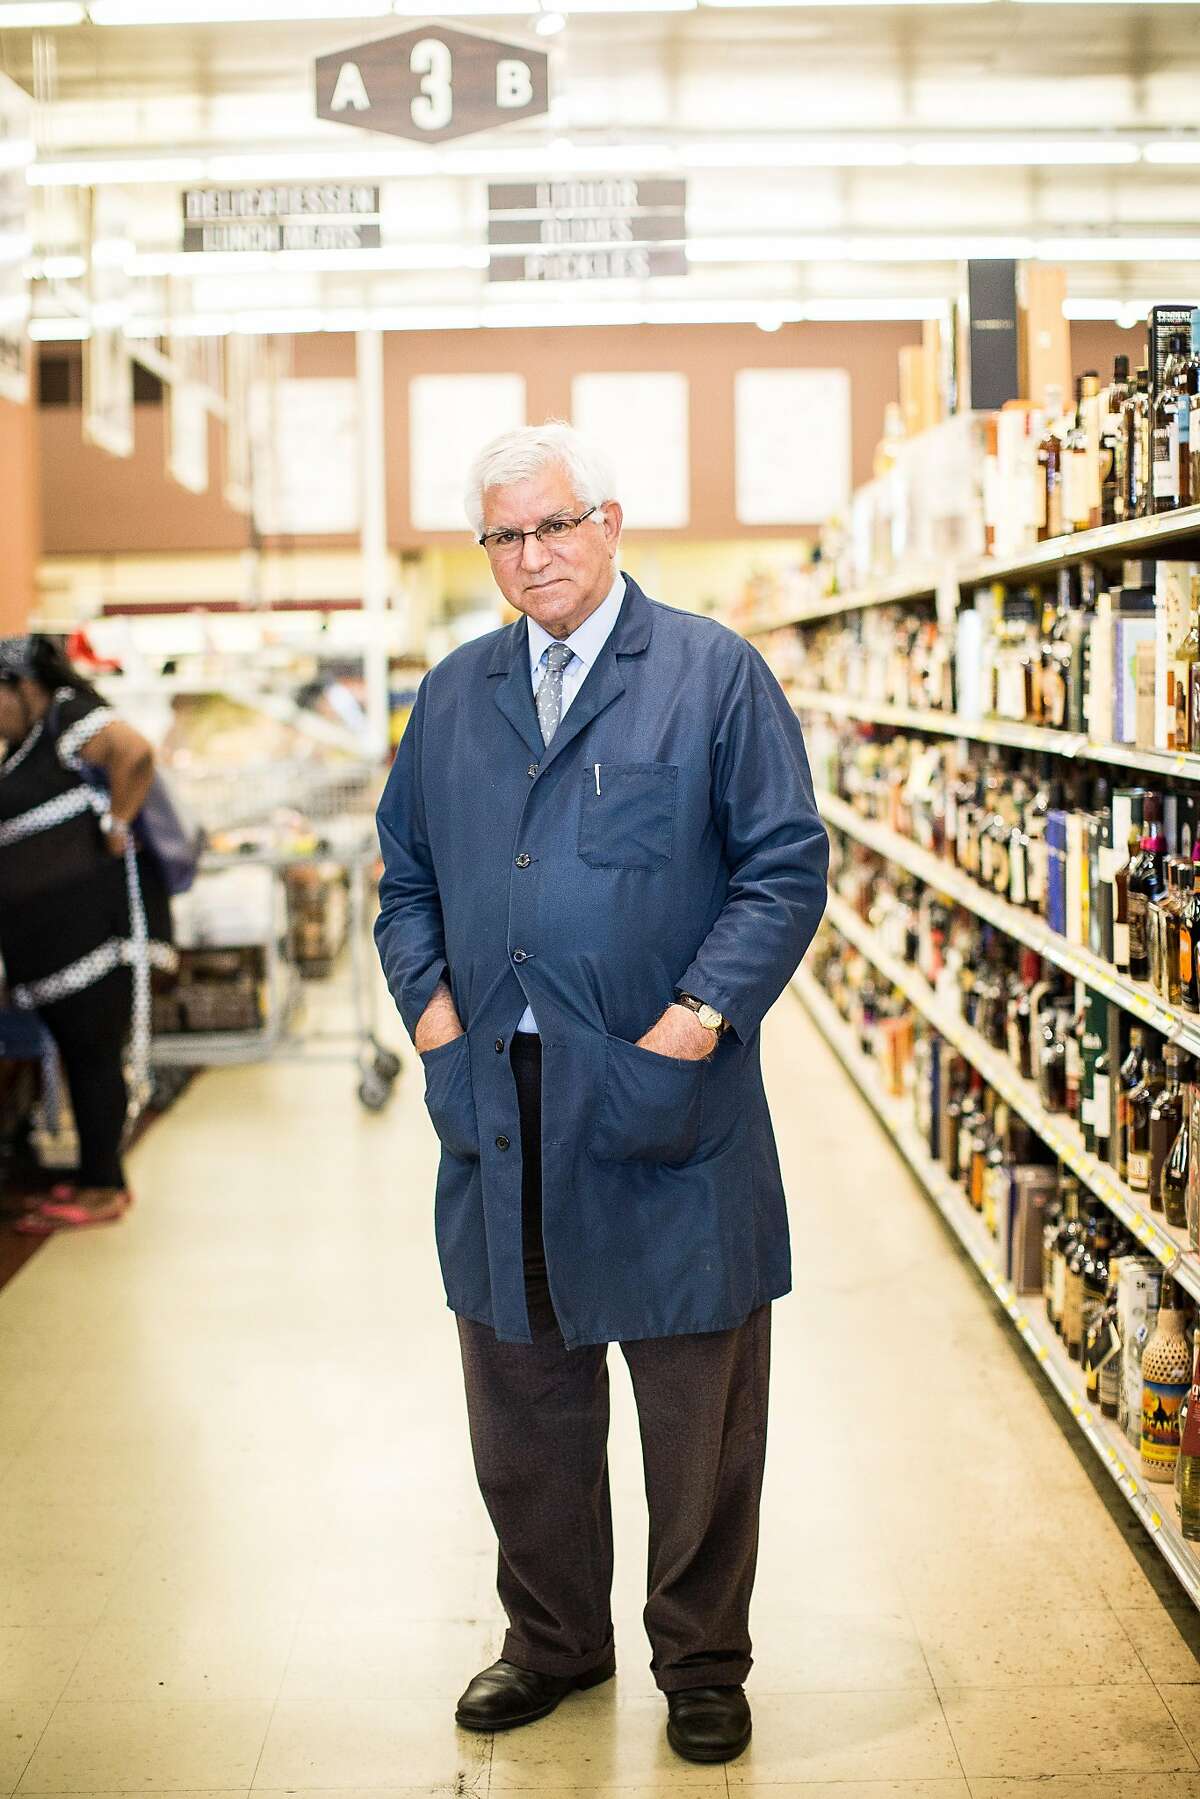 Darrell Corti, owner of Corti Brothers grocery store, poses for a portrait in east Sacramento, California, August 15, 2015.